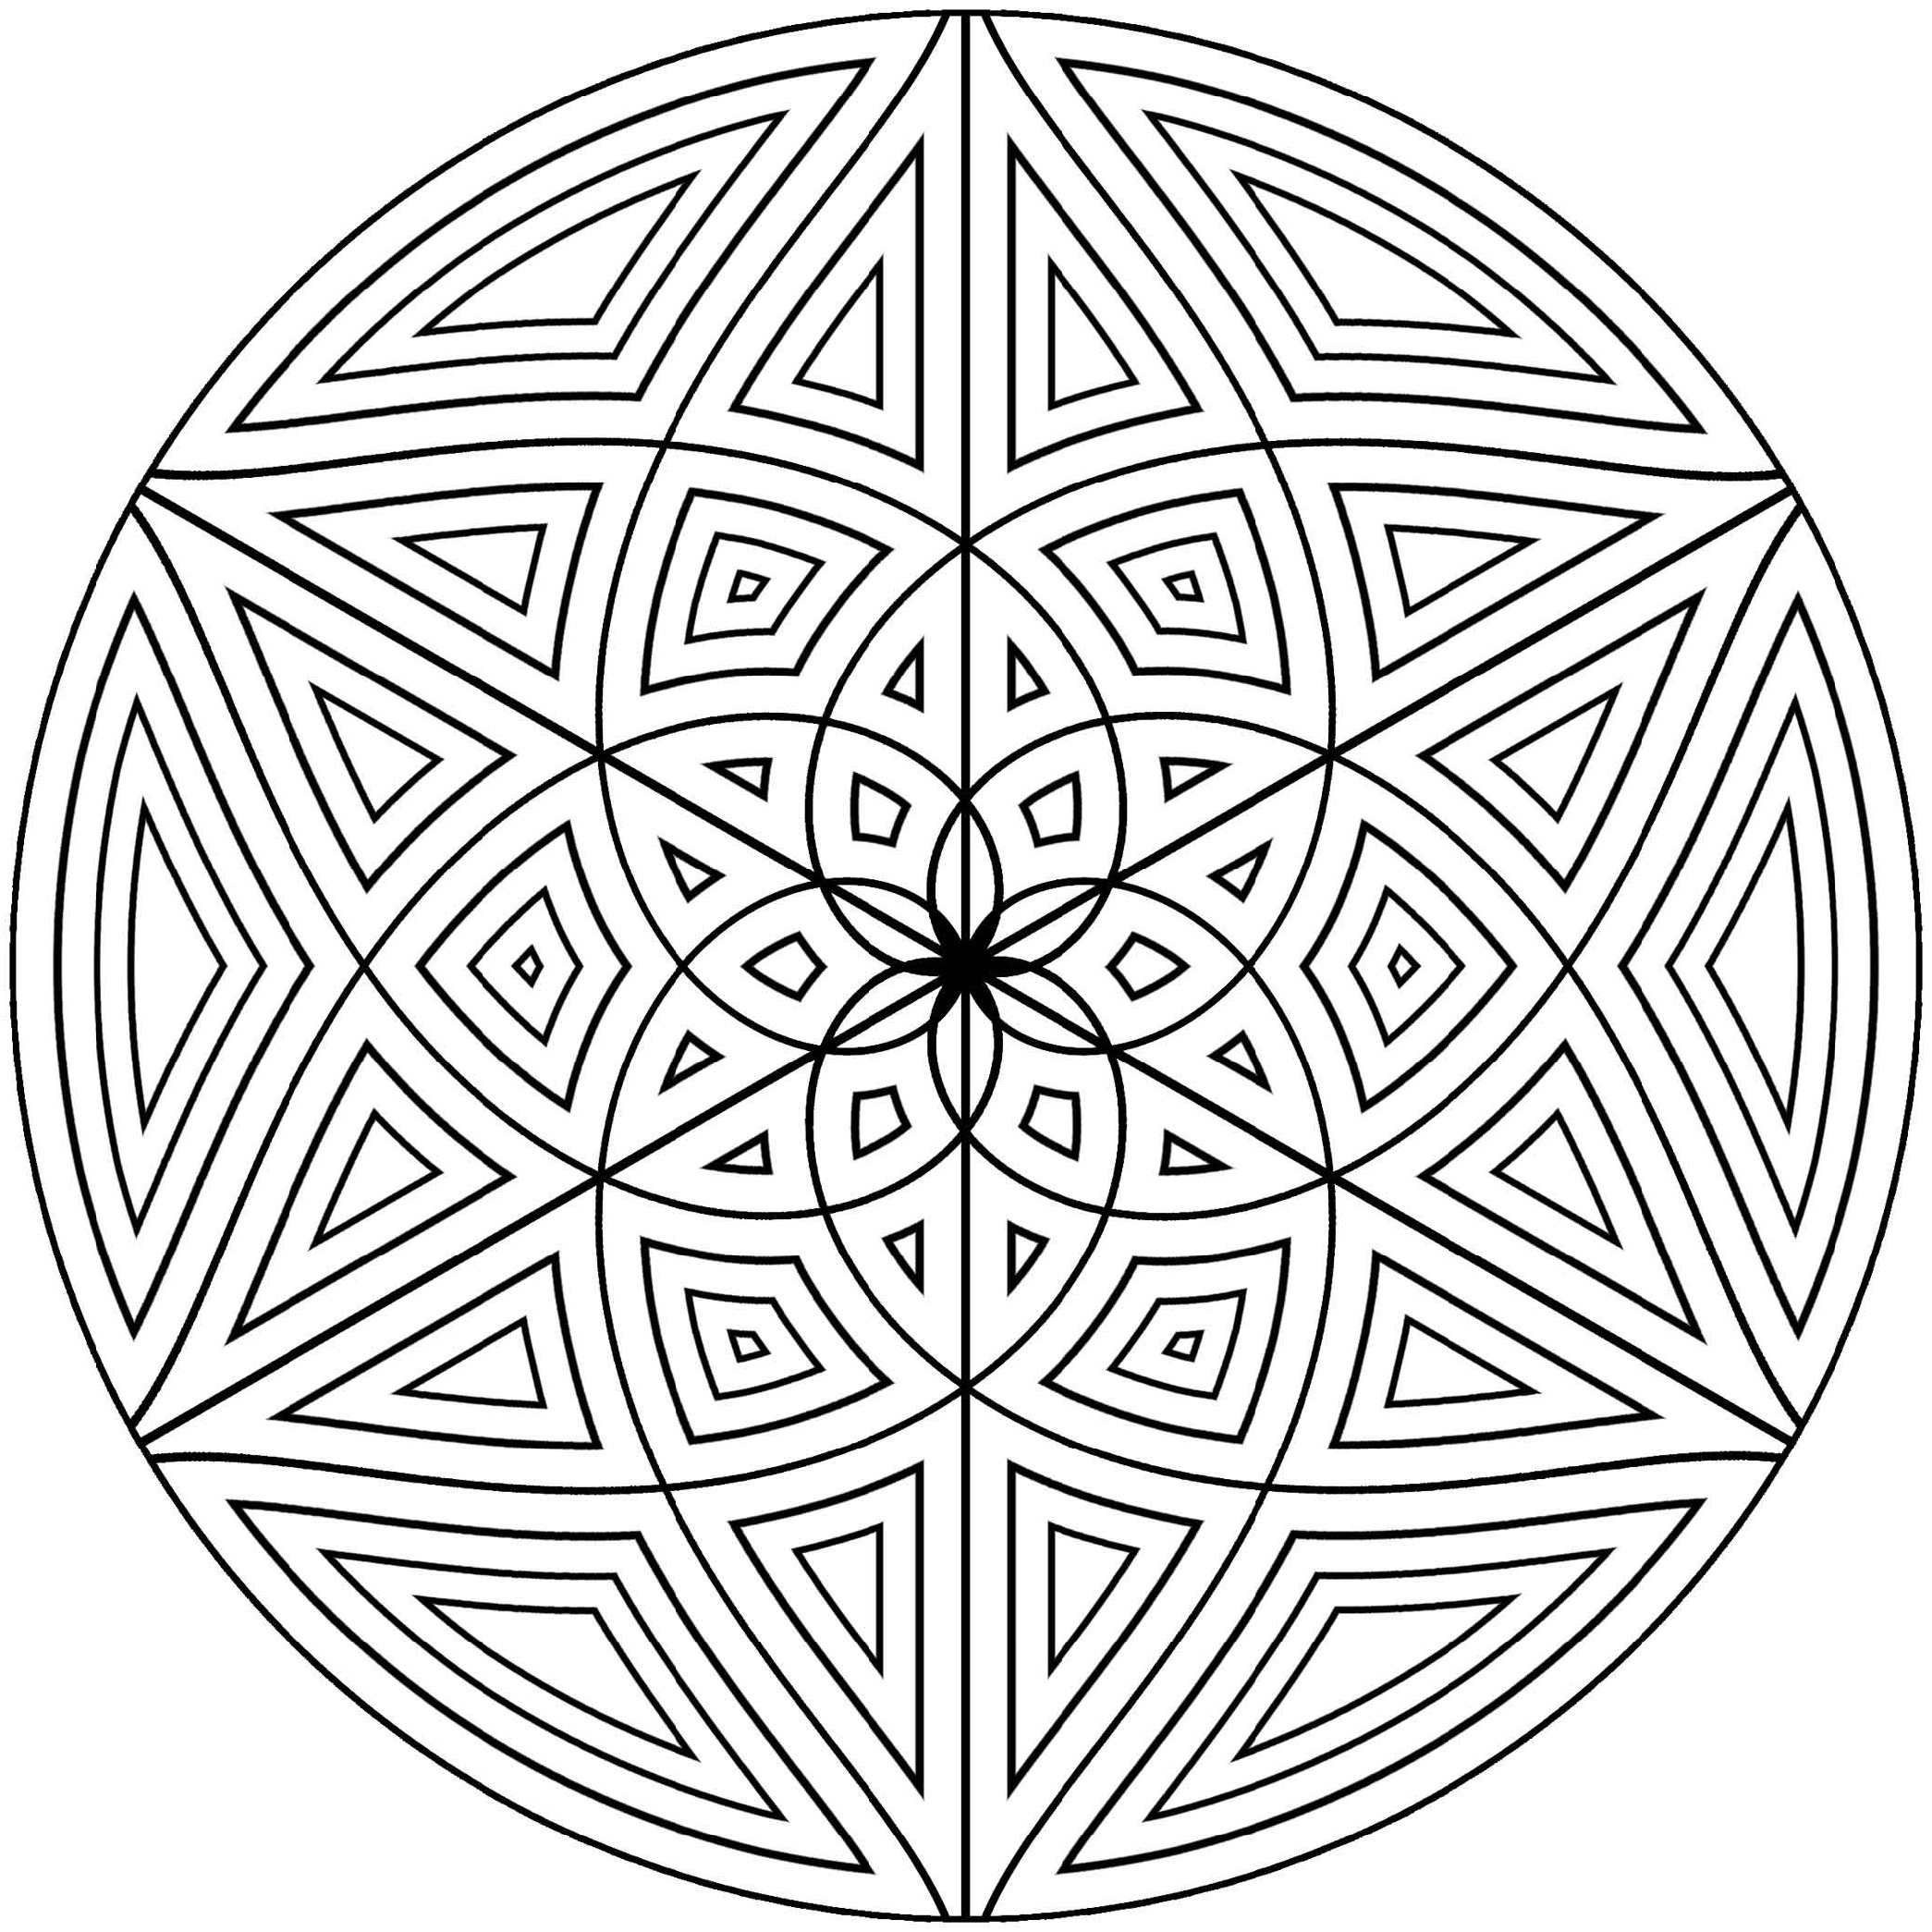 Coloring Pages To Print For Adults Geometric